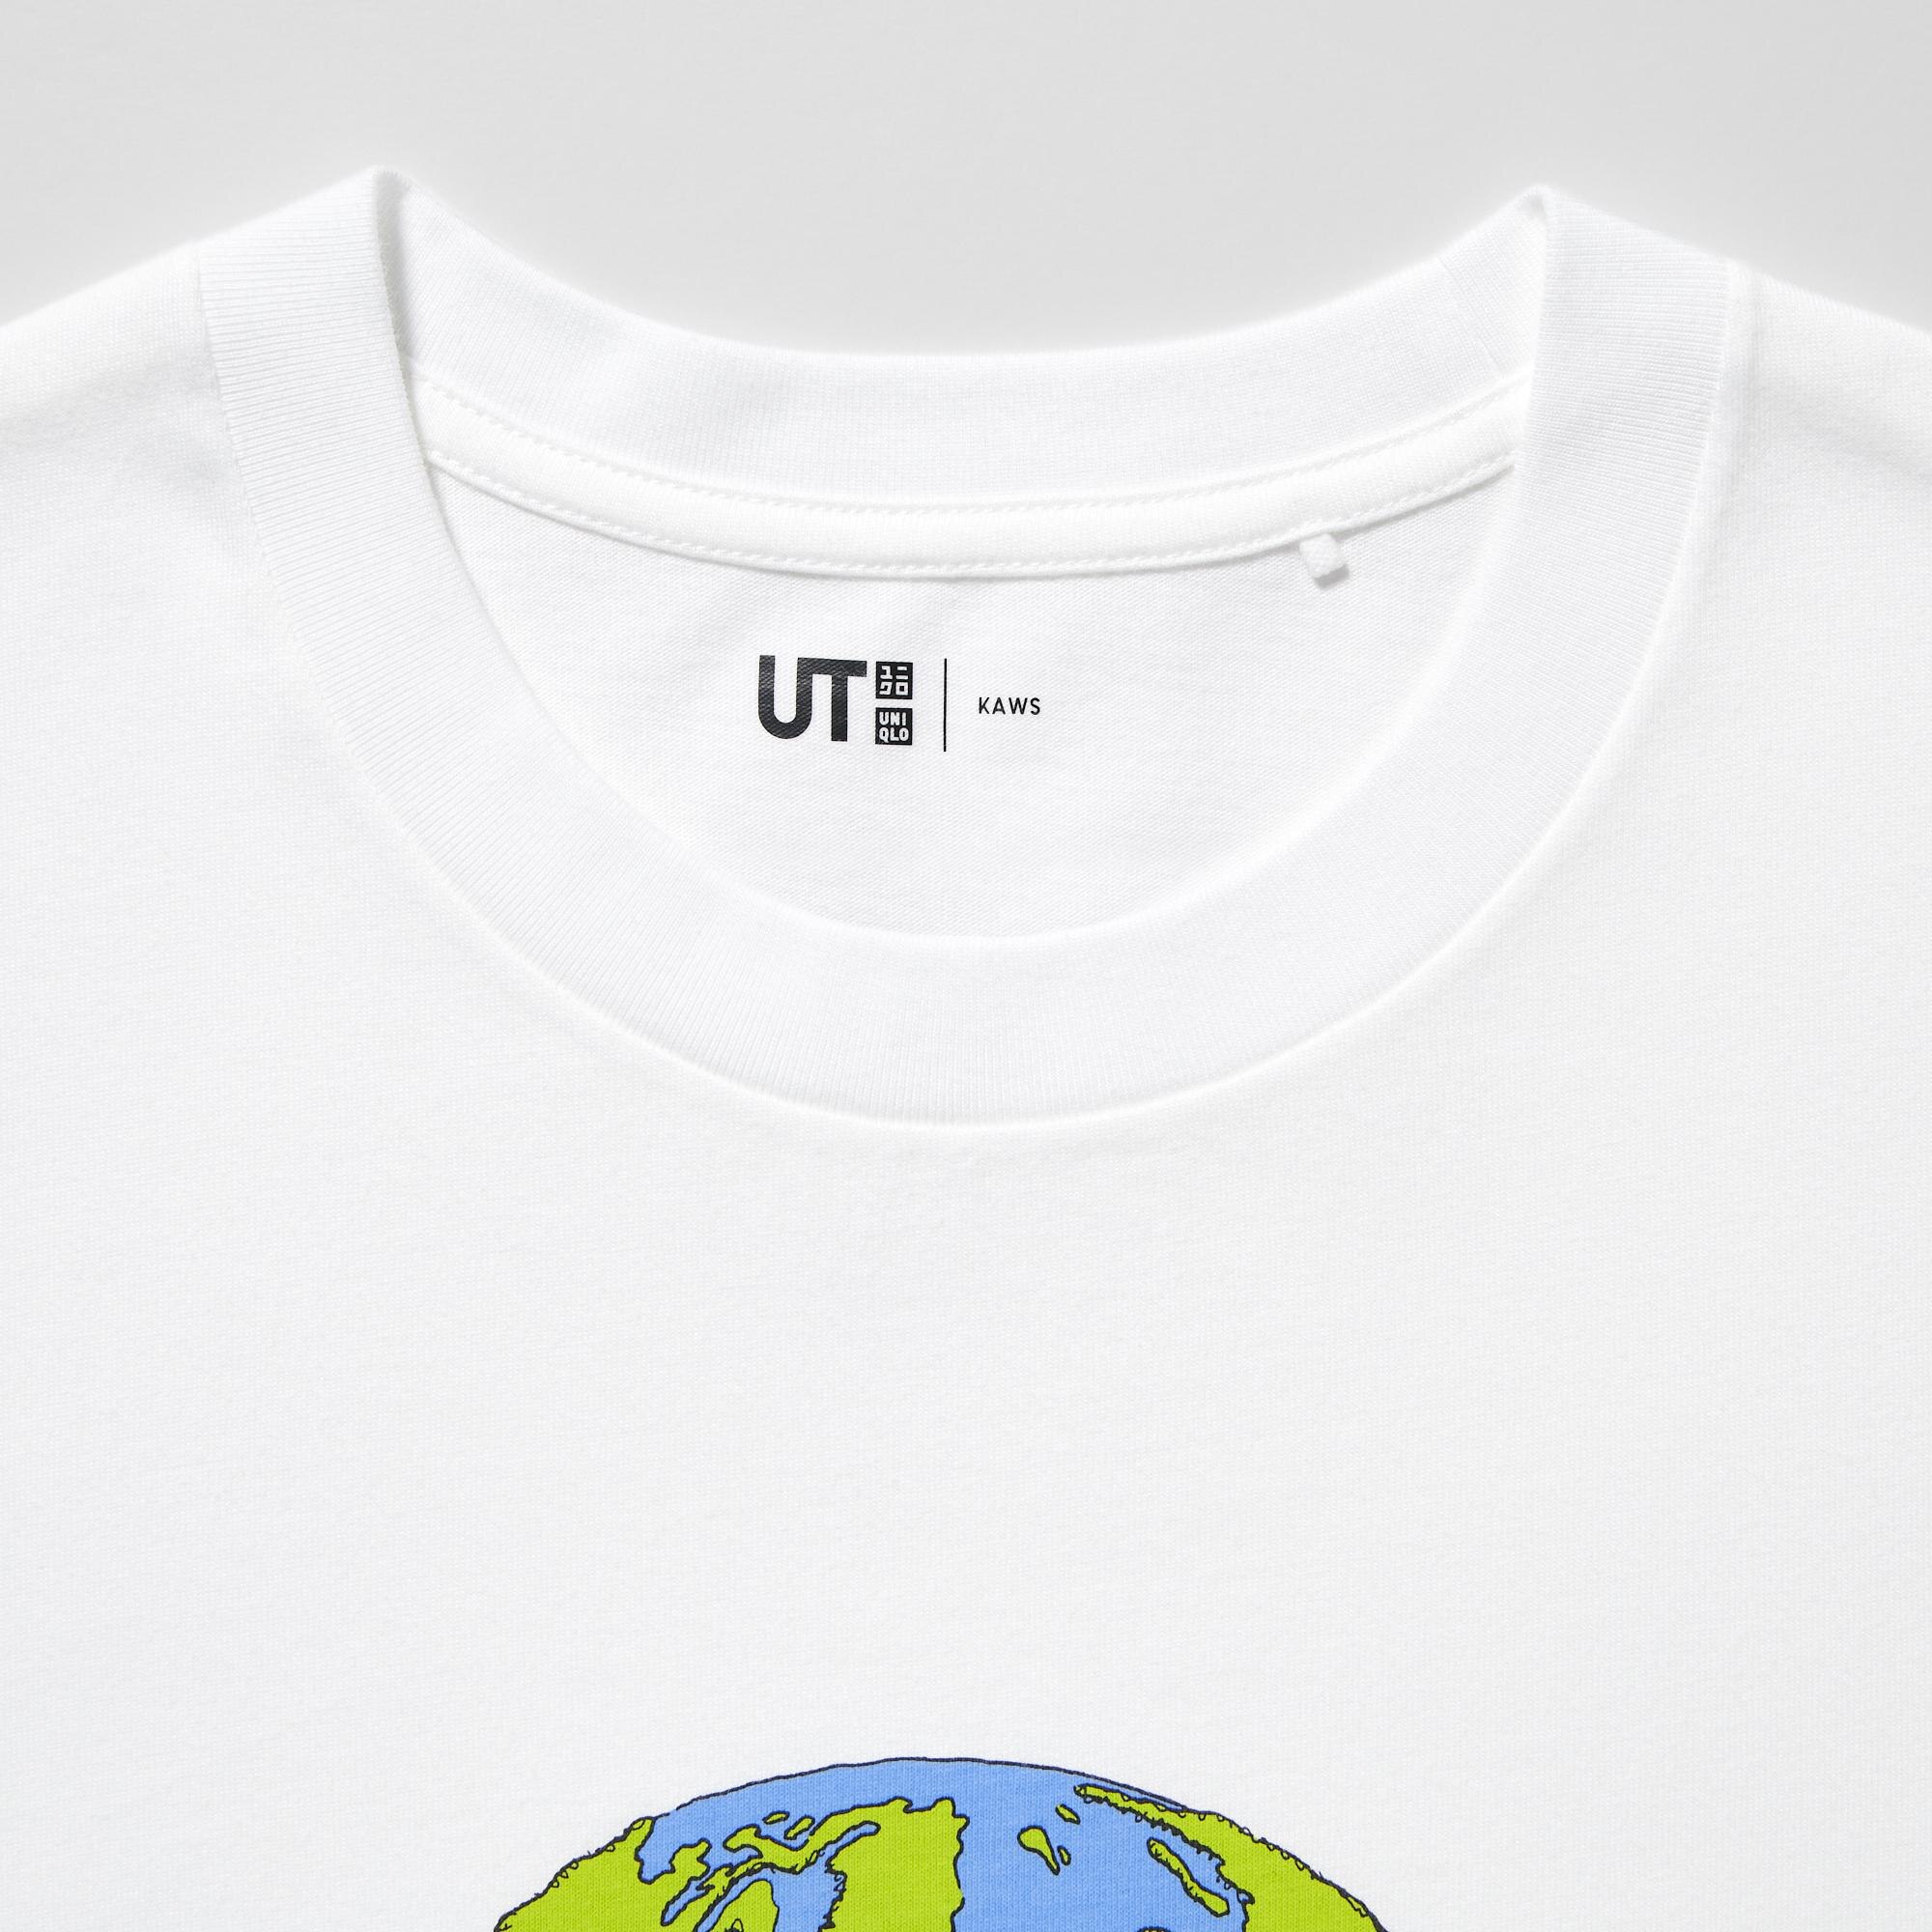 KAWS SUMMER graphic tees and totes are here  UNIQLO TODAY  UNIQLO US